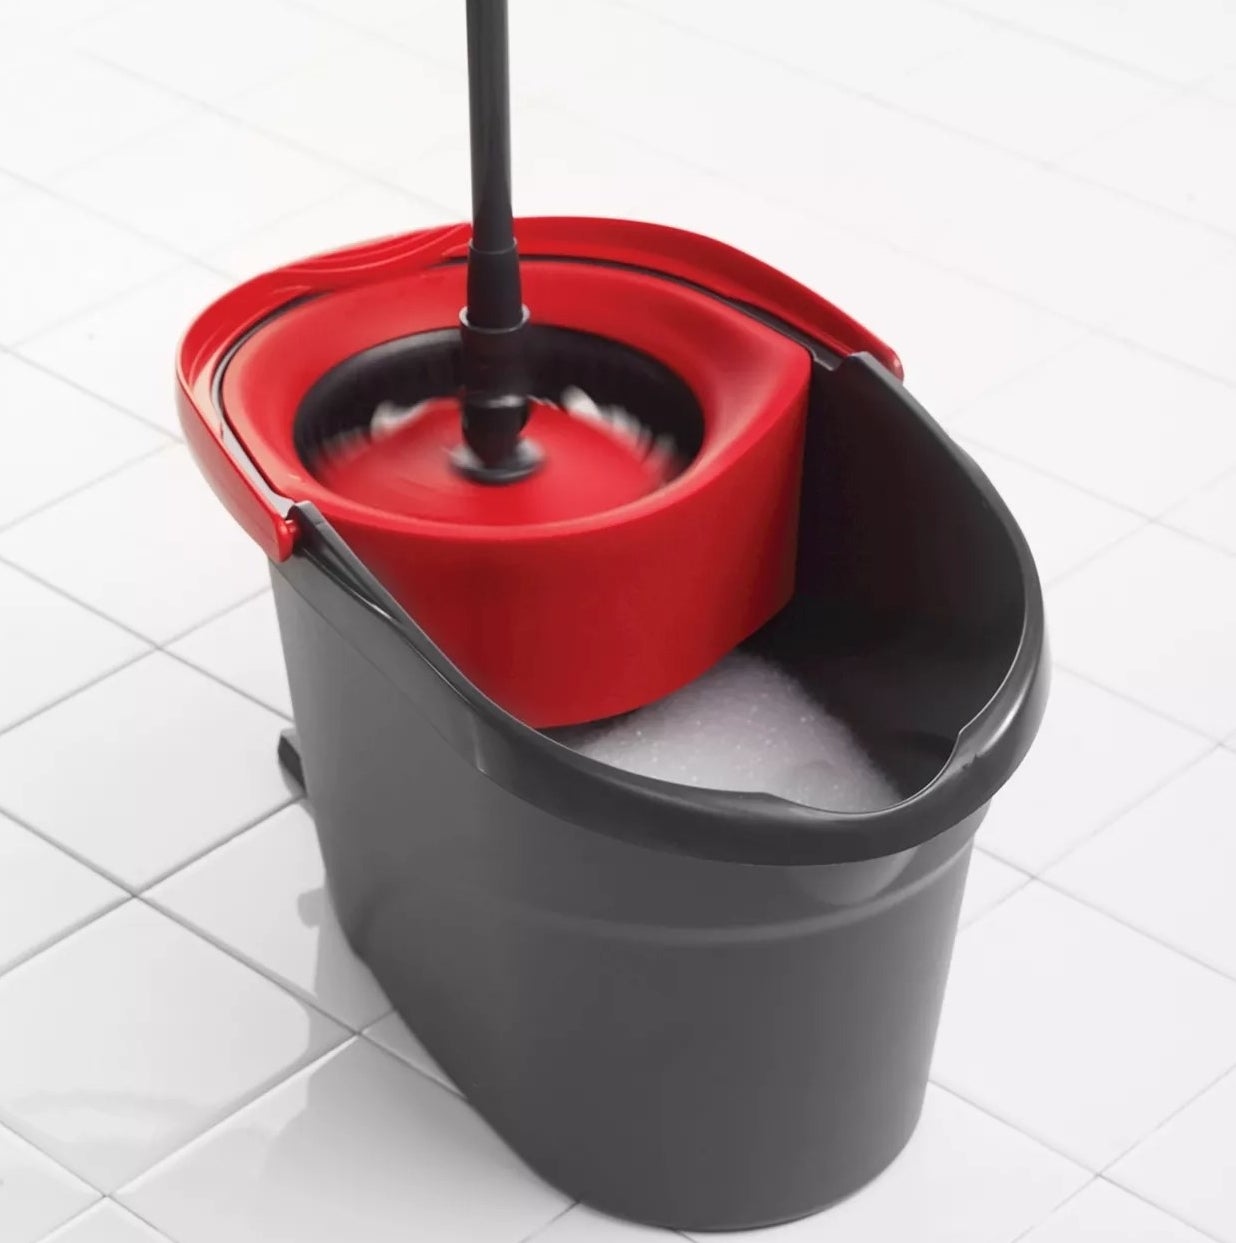 The mop in the spin bucket